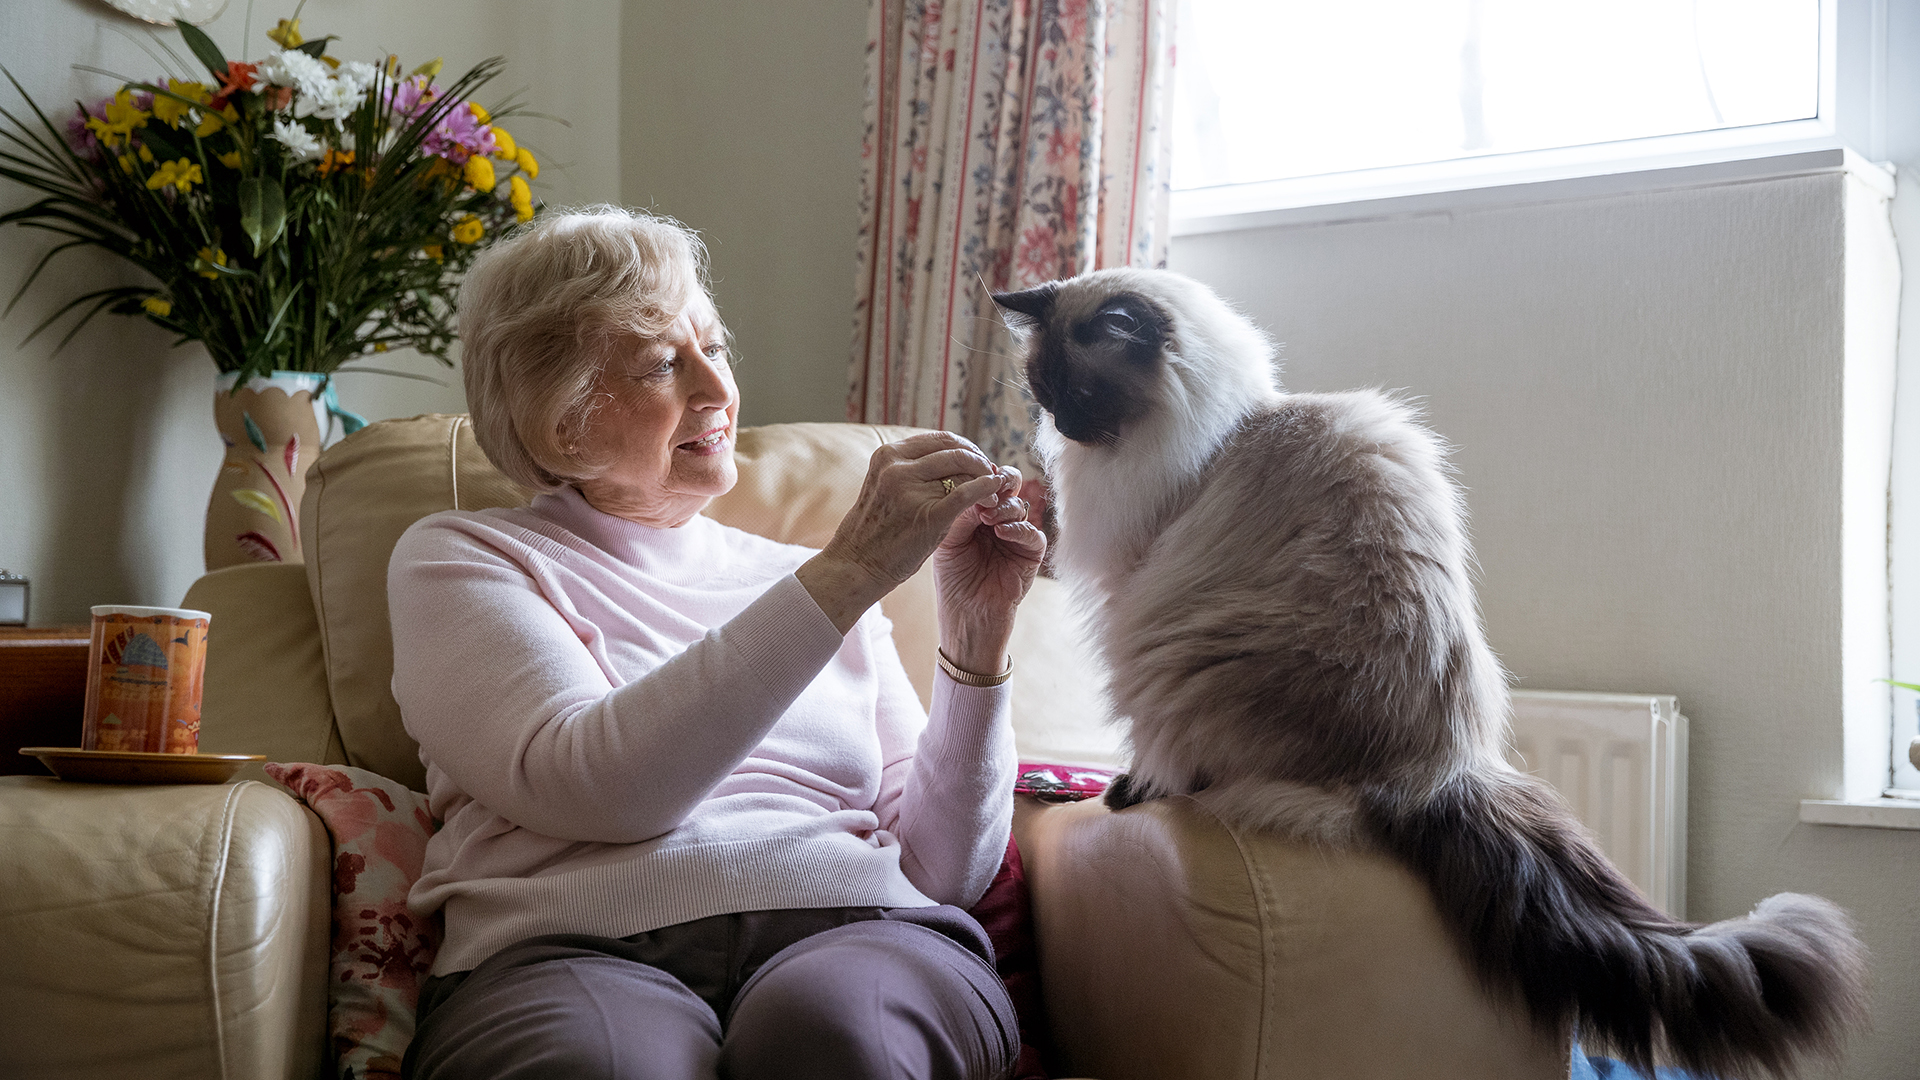 one of the best companion pets for seniors is a ragdoll cat. A senior woman sits on the couch with her ragdoll cat